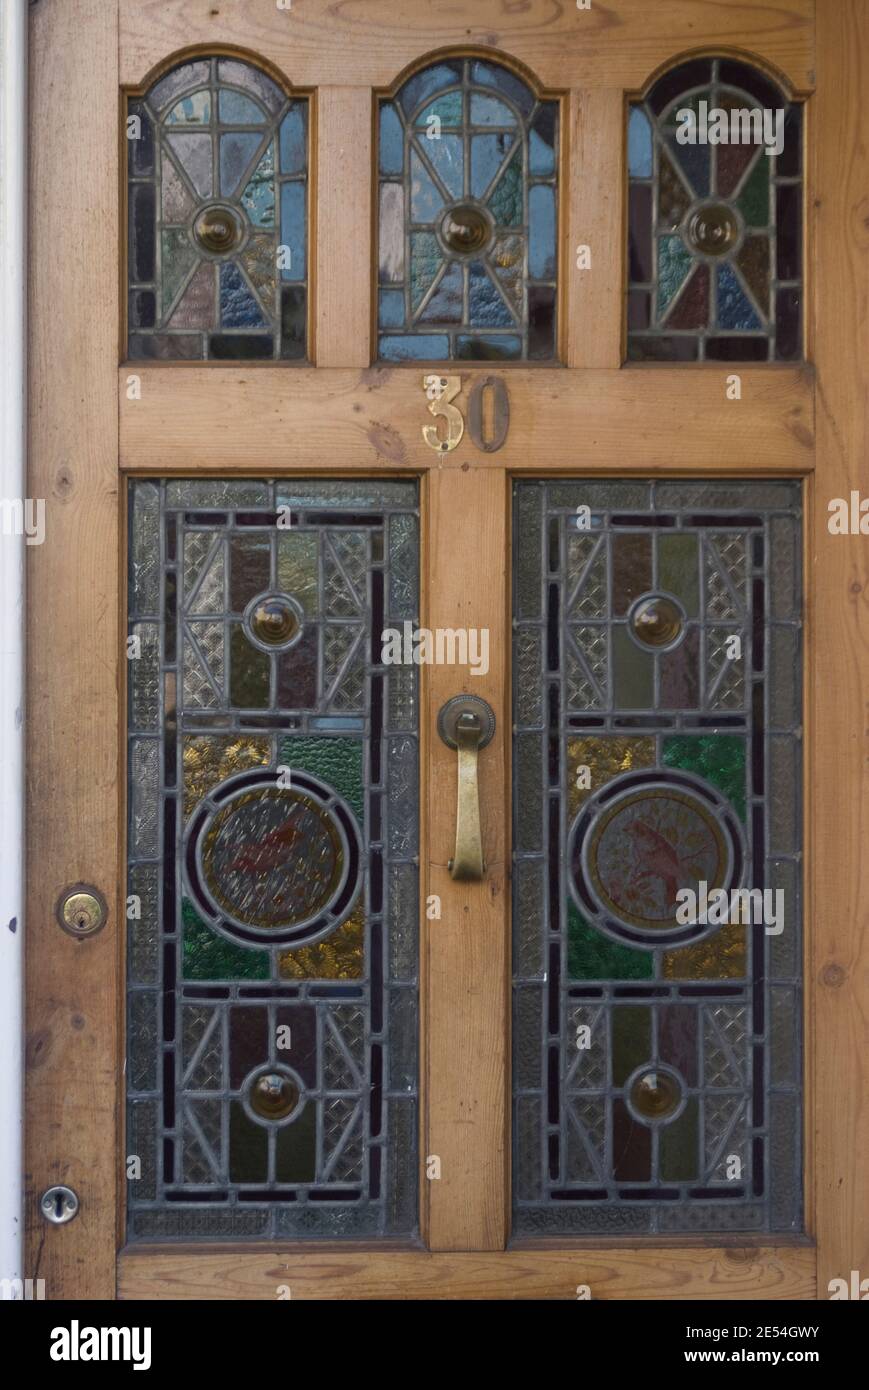 Stained glass inlays on a front door of a domestic house, Peckham, London, SE15, England | NONE | Stock Photo